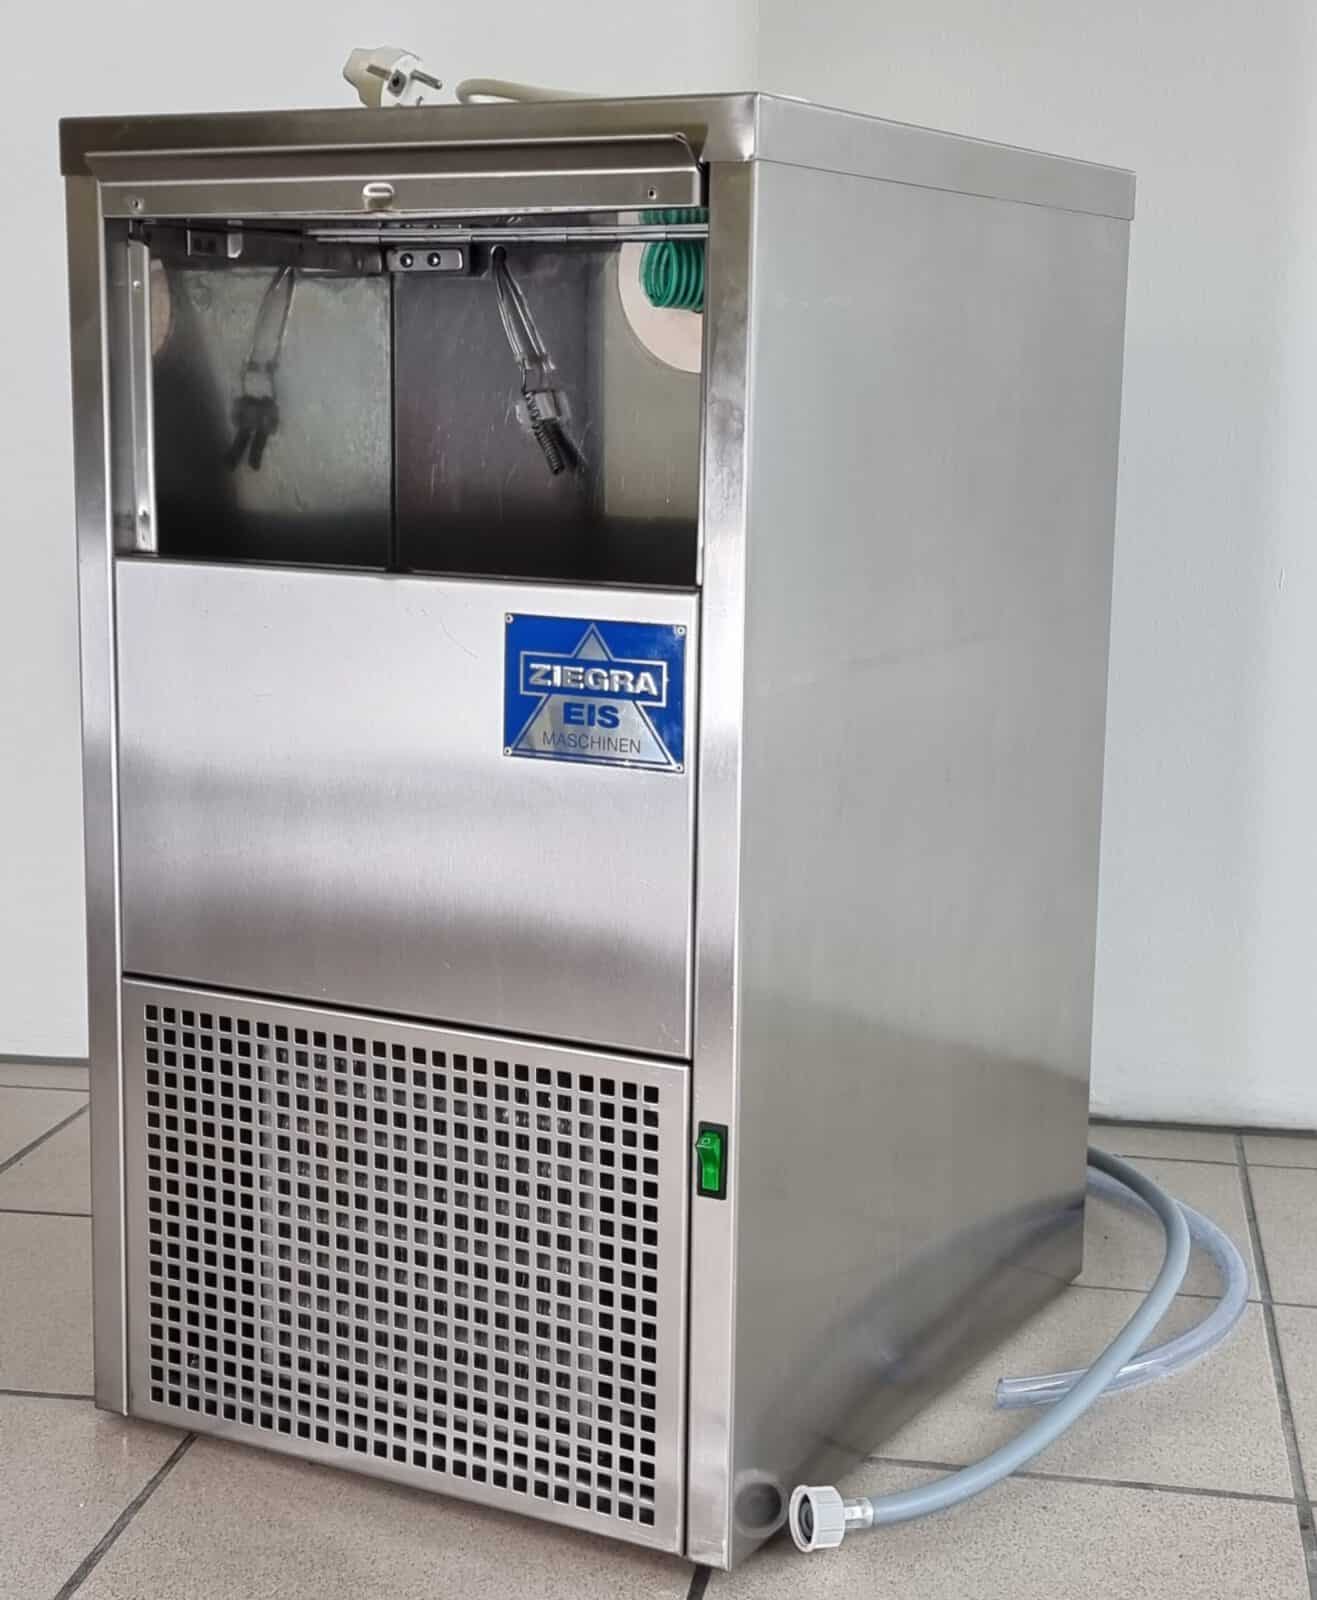 70 kg ZIEGRA Eismaschinen GmbH - Commercial crushed ice machines - ZBE  70-35 at best price in Greater Noida